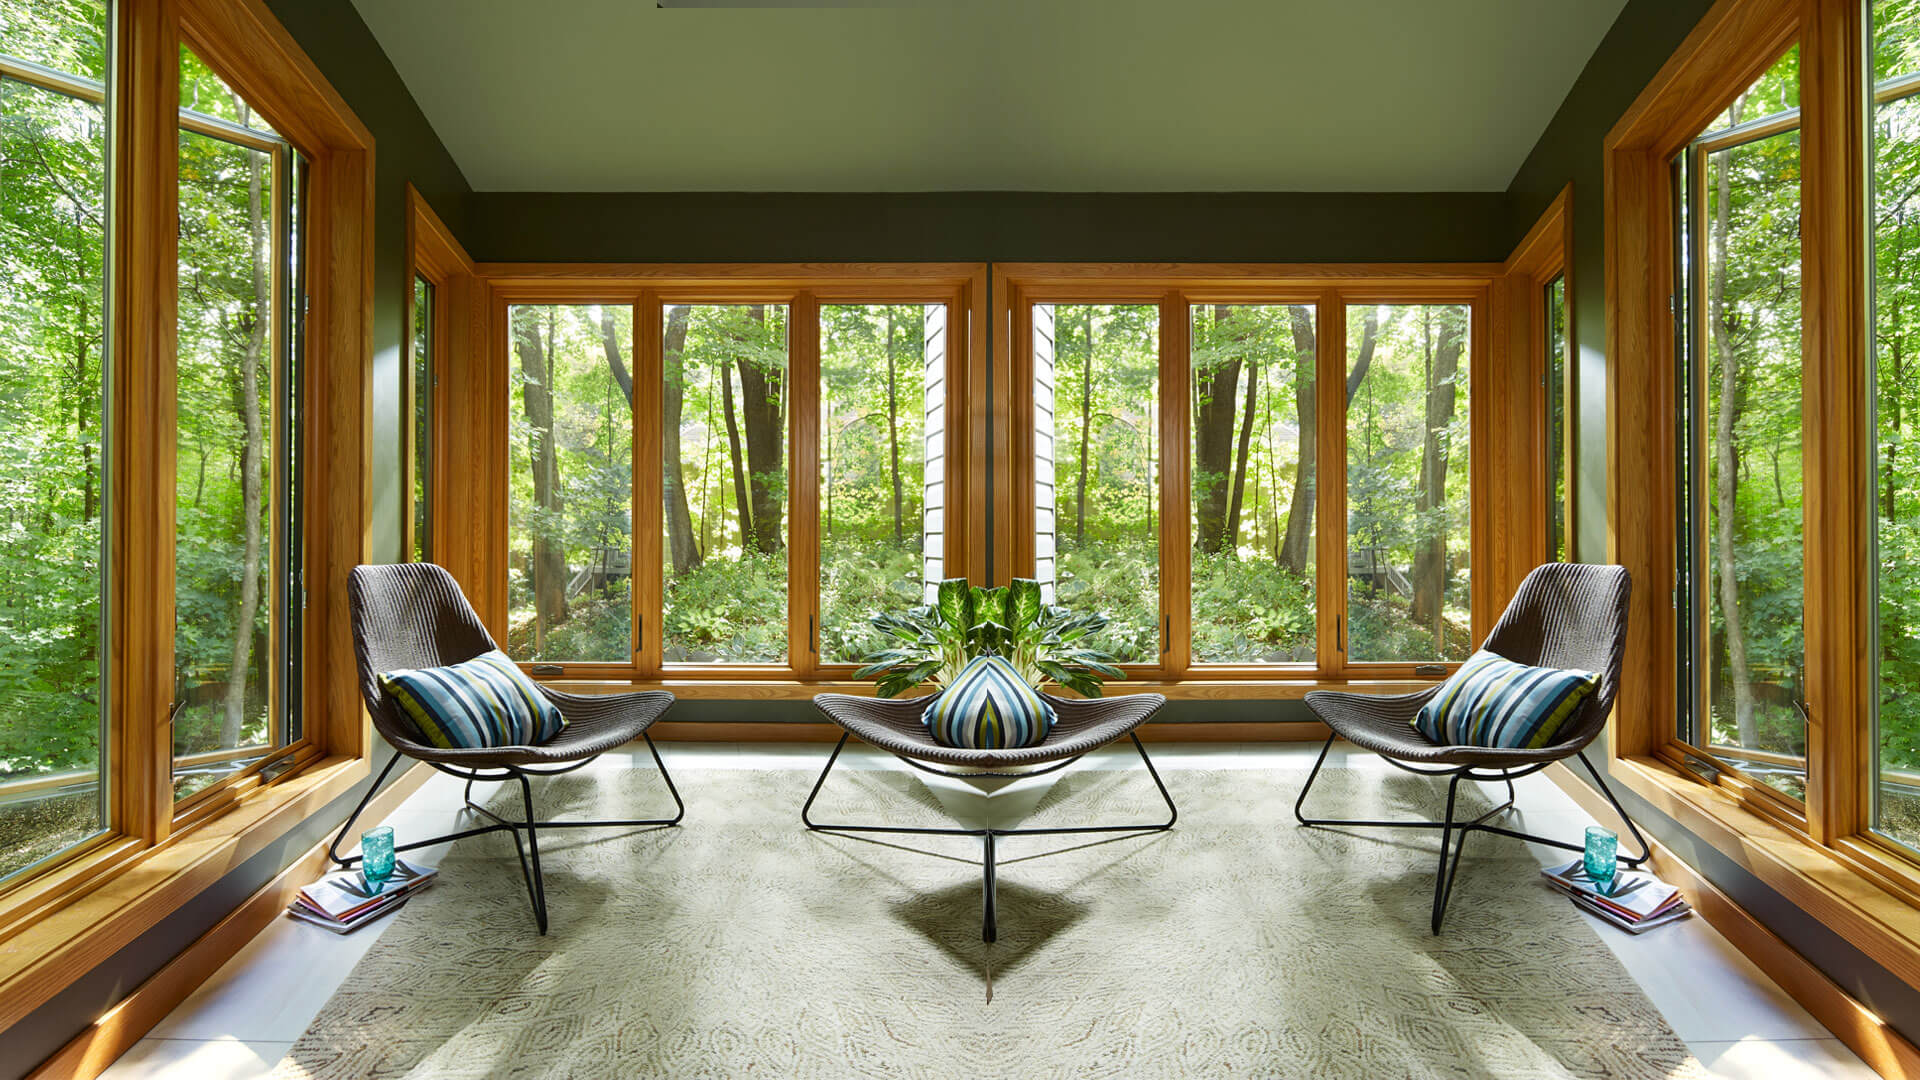 Rustic-style sunroom with two chairs, a coffee table, and large woodgrain casement windows overlooking forest.